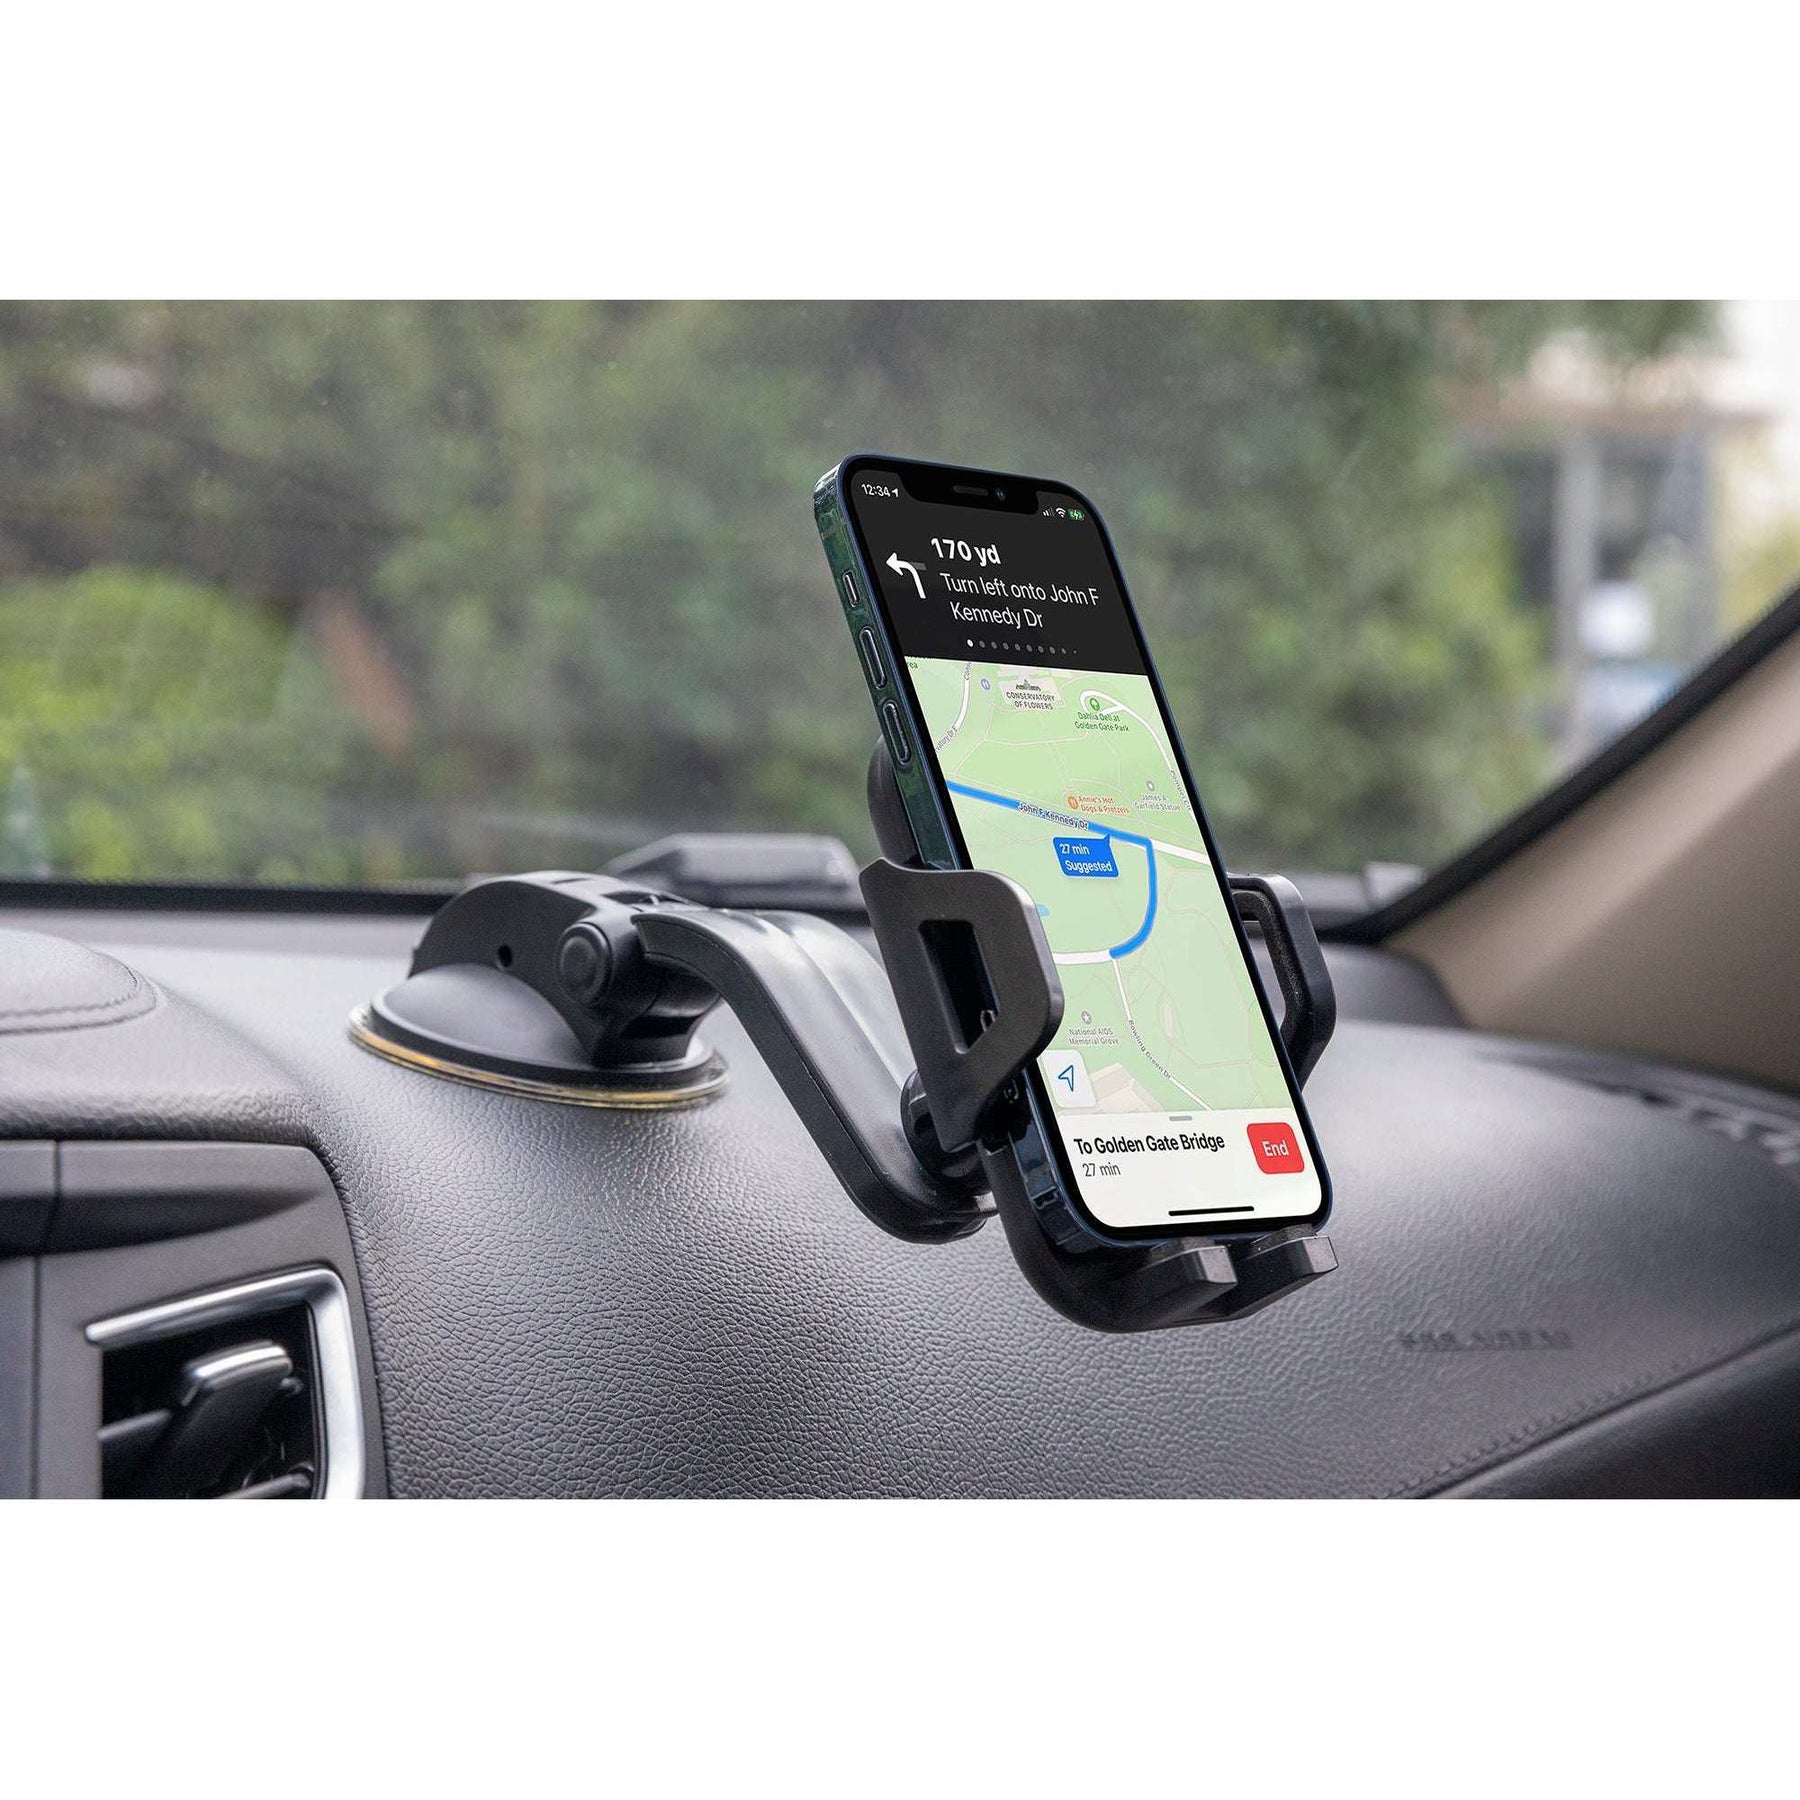 Cradle Phone Car Mount with Powerful Suction Cup, Movable Jaws, Joint & Arm